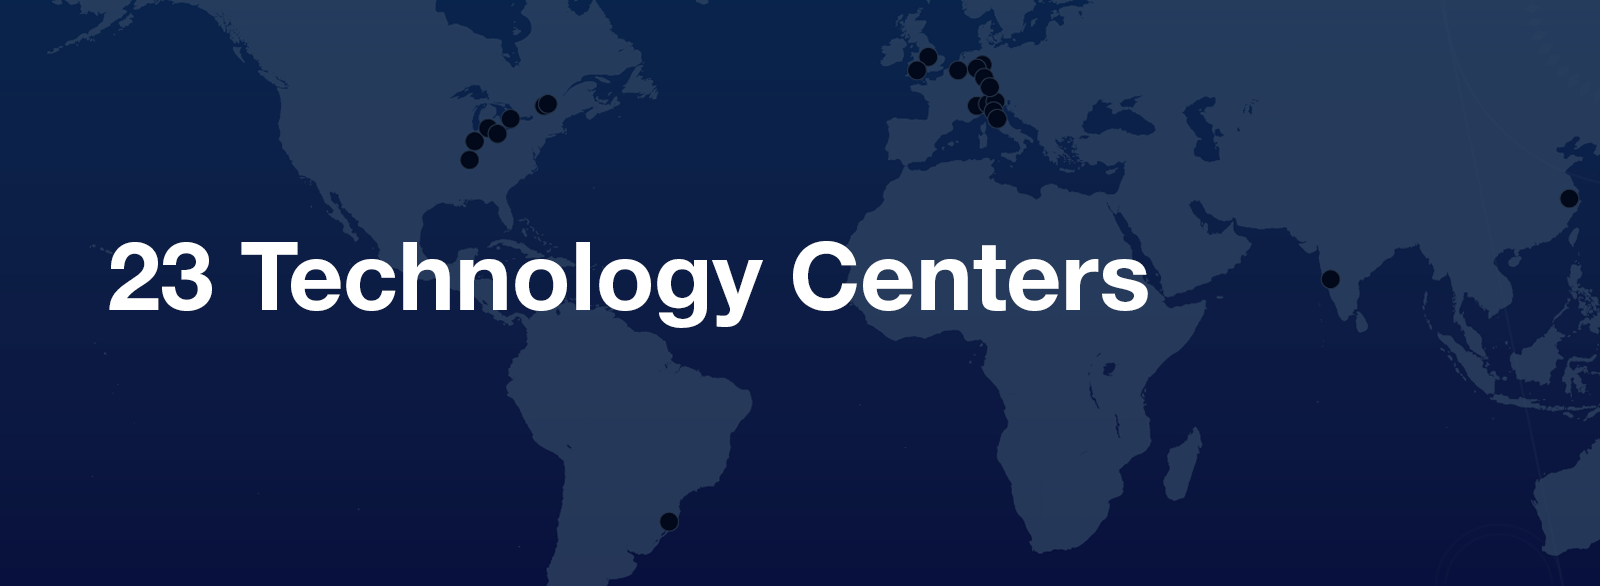 23 Technology Centers